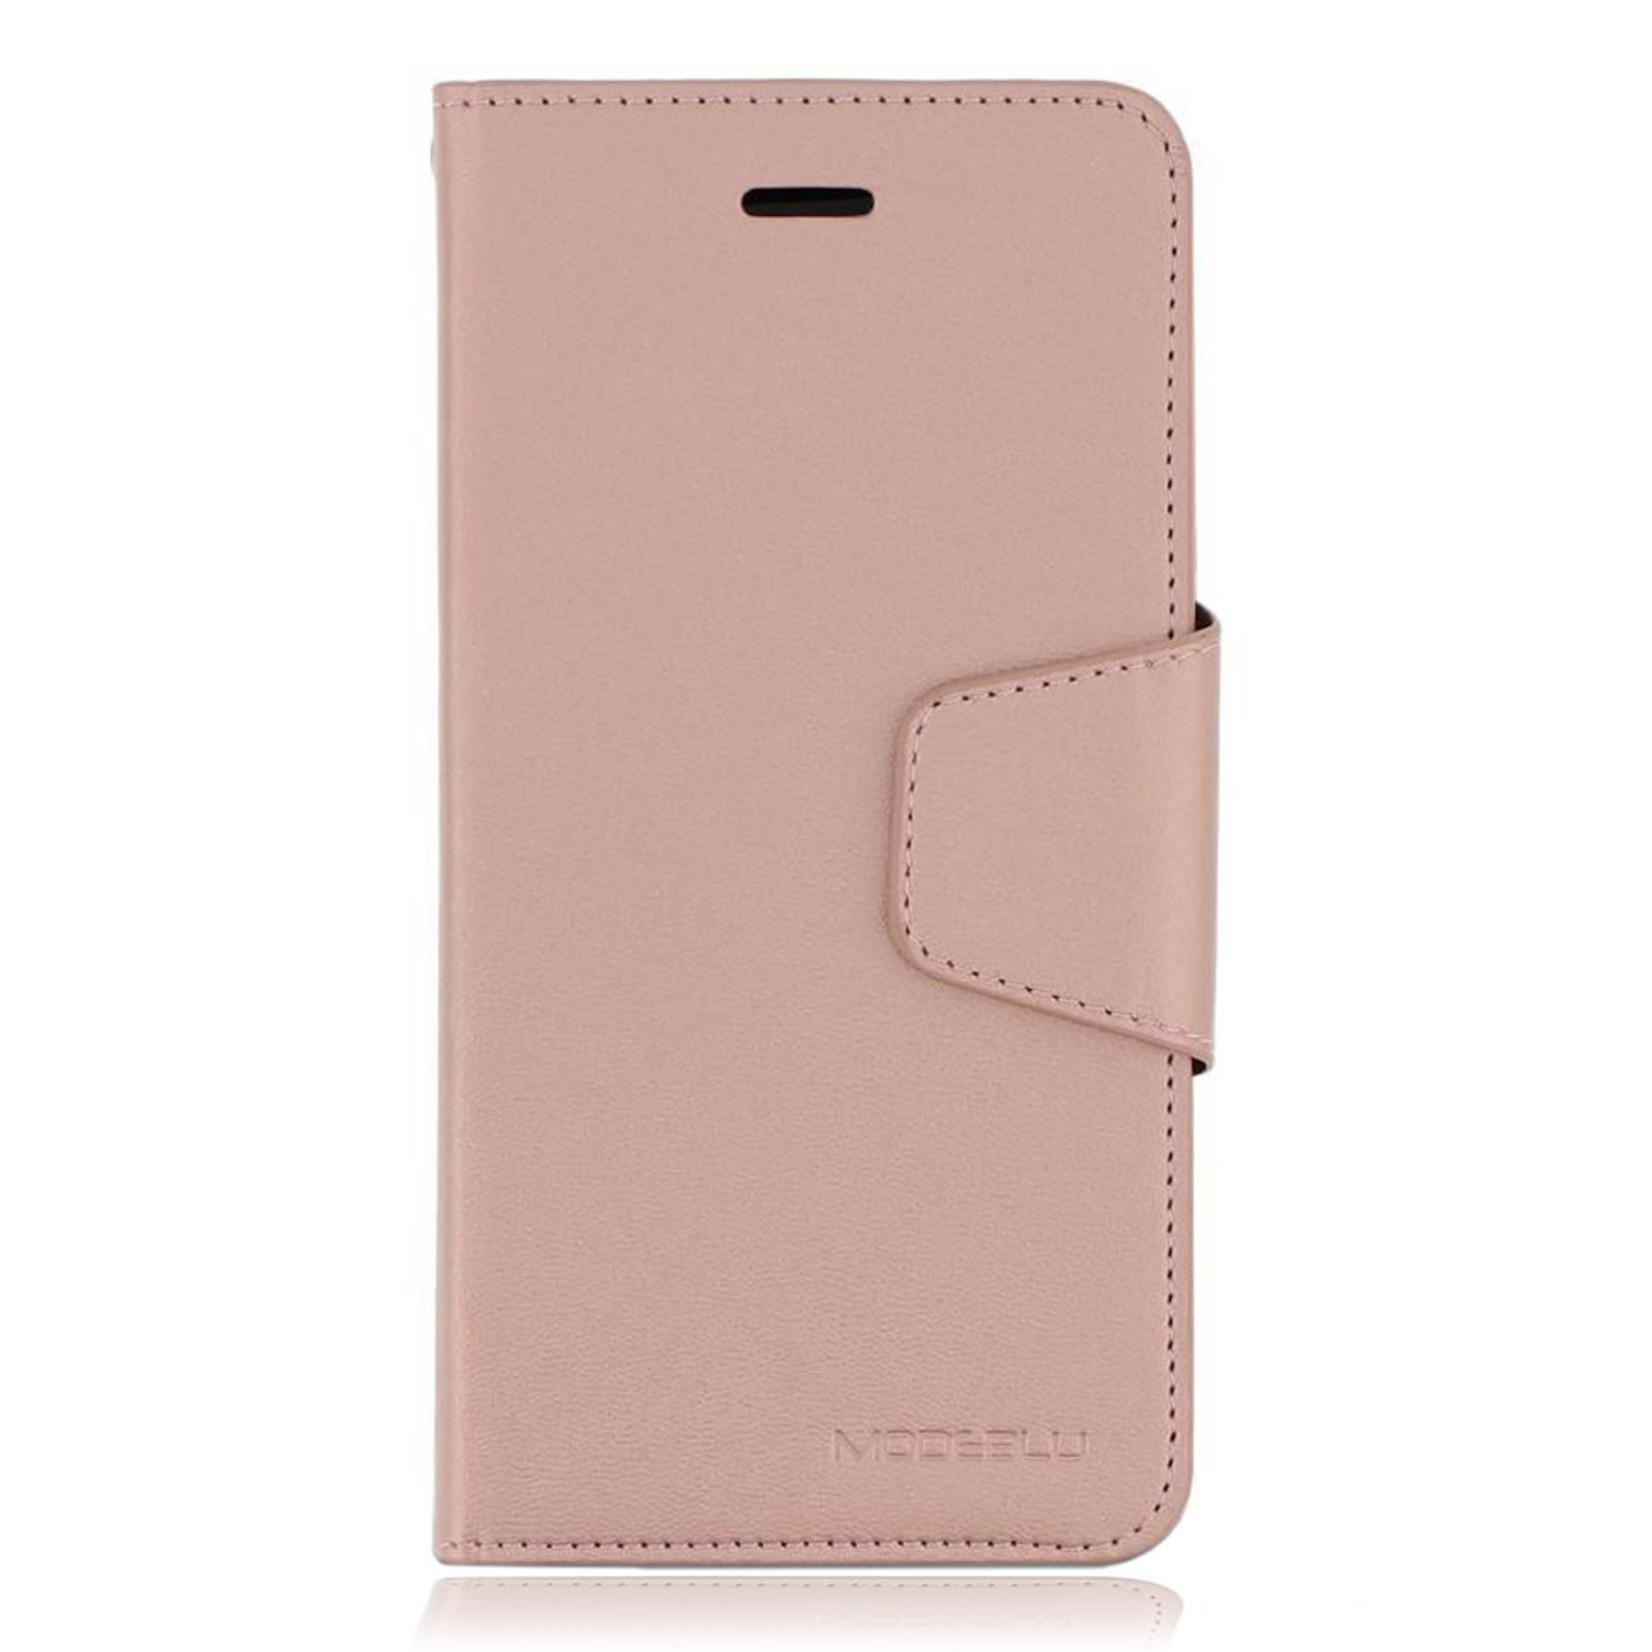 ModeBlu PU Leather Wallet Classic Diary Case for Galaxy Note 10 Plus